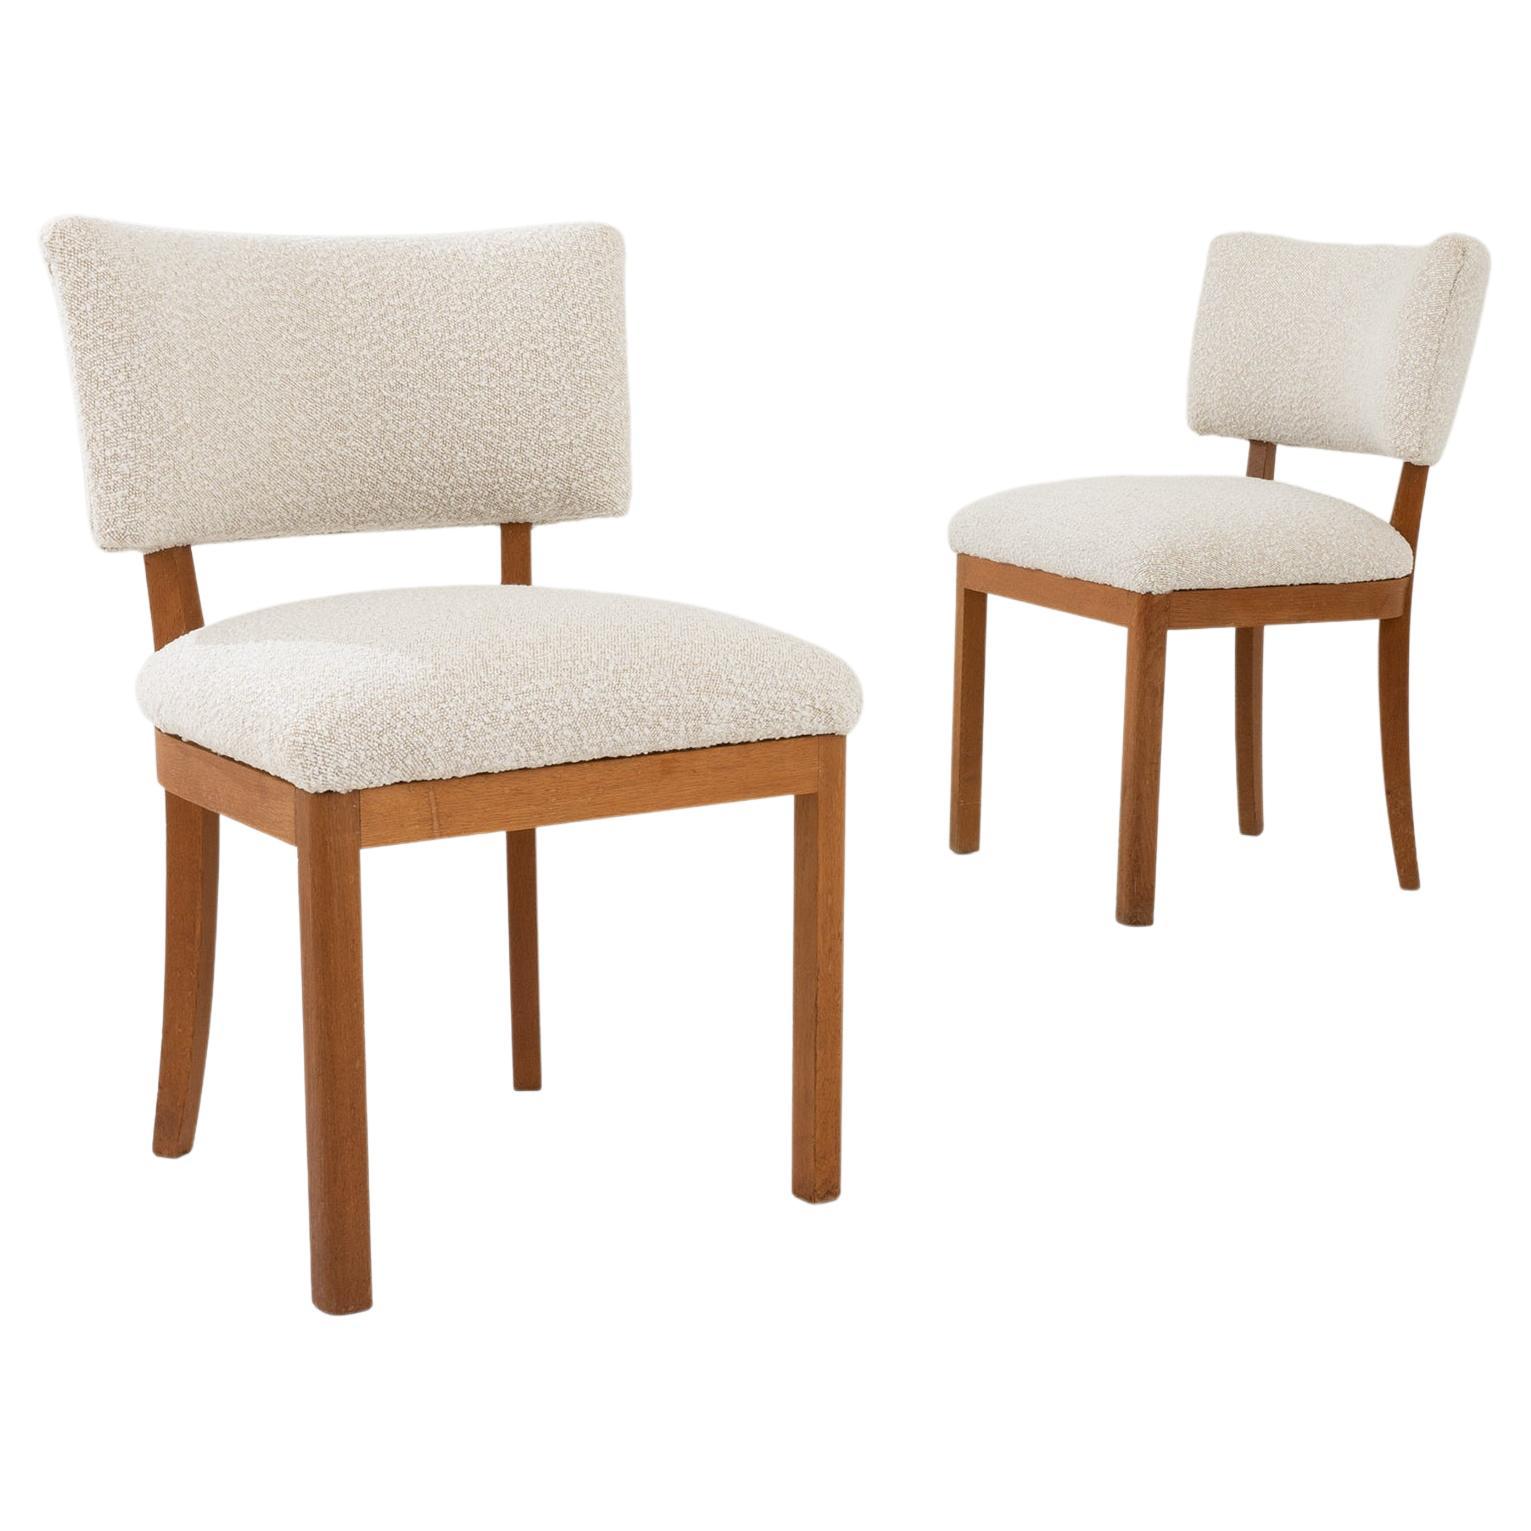 20th Century Czech Upholstered Dining Chairs, a Pair For Sale